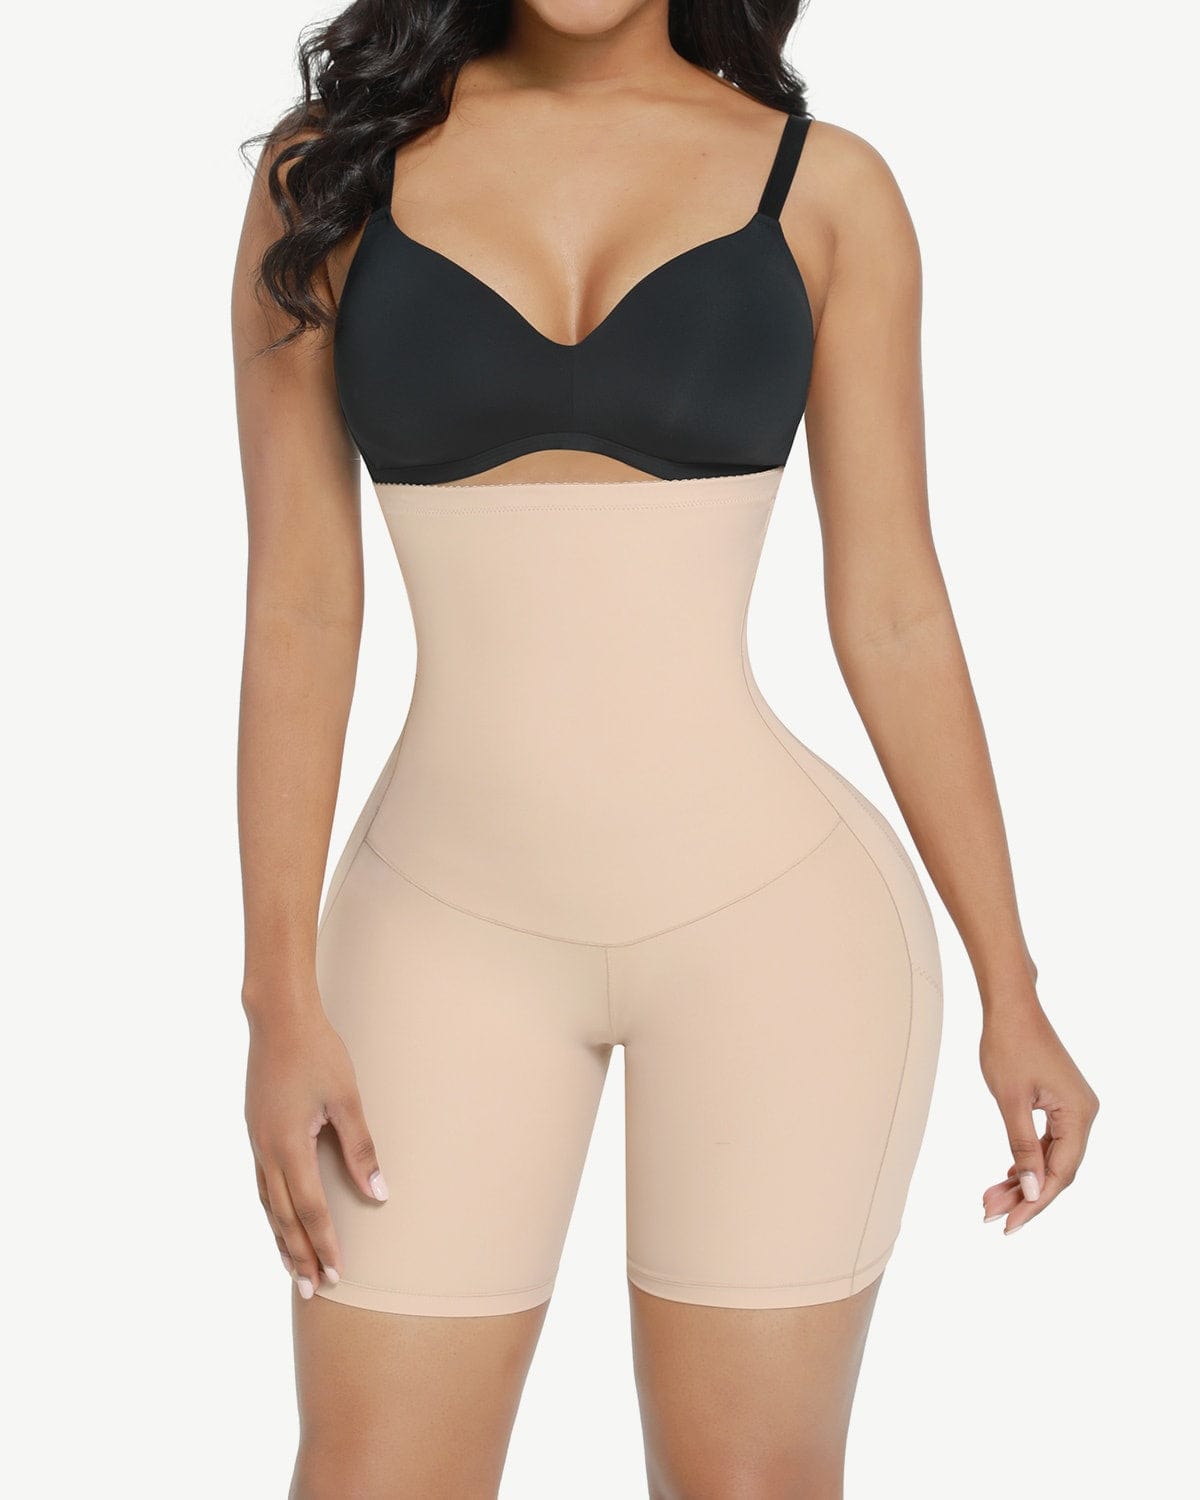 KELLYLEE Butt Lifter Panties Tummy Control Shapewear Shorts for